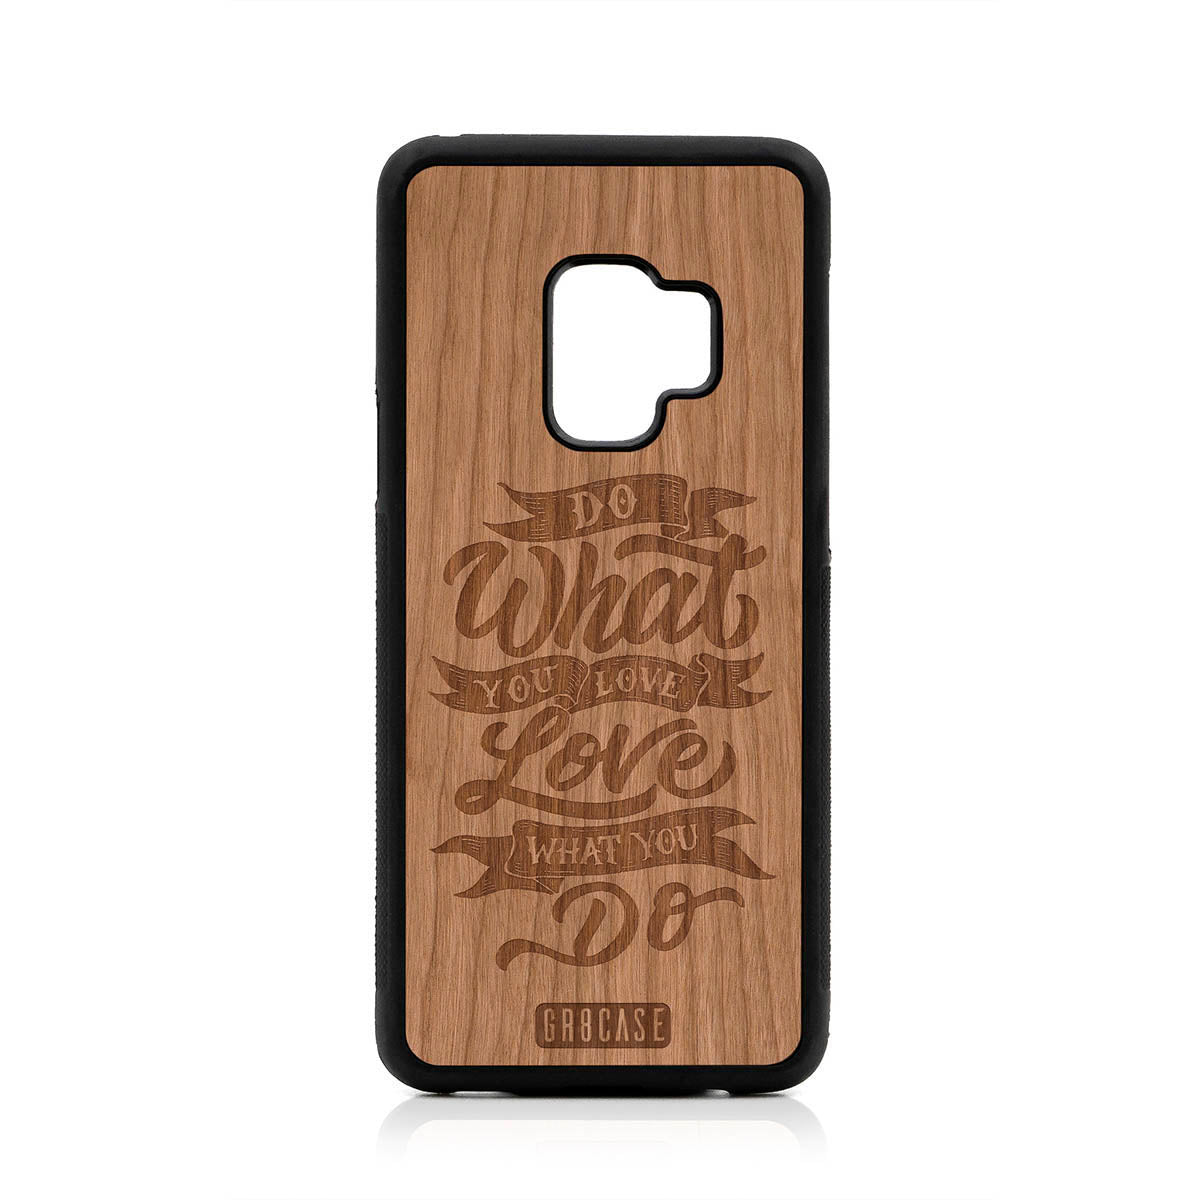 Do What You Love Love What You Do Design Wood Case For Samsung Galaxy S9 by GR8CASE